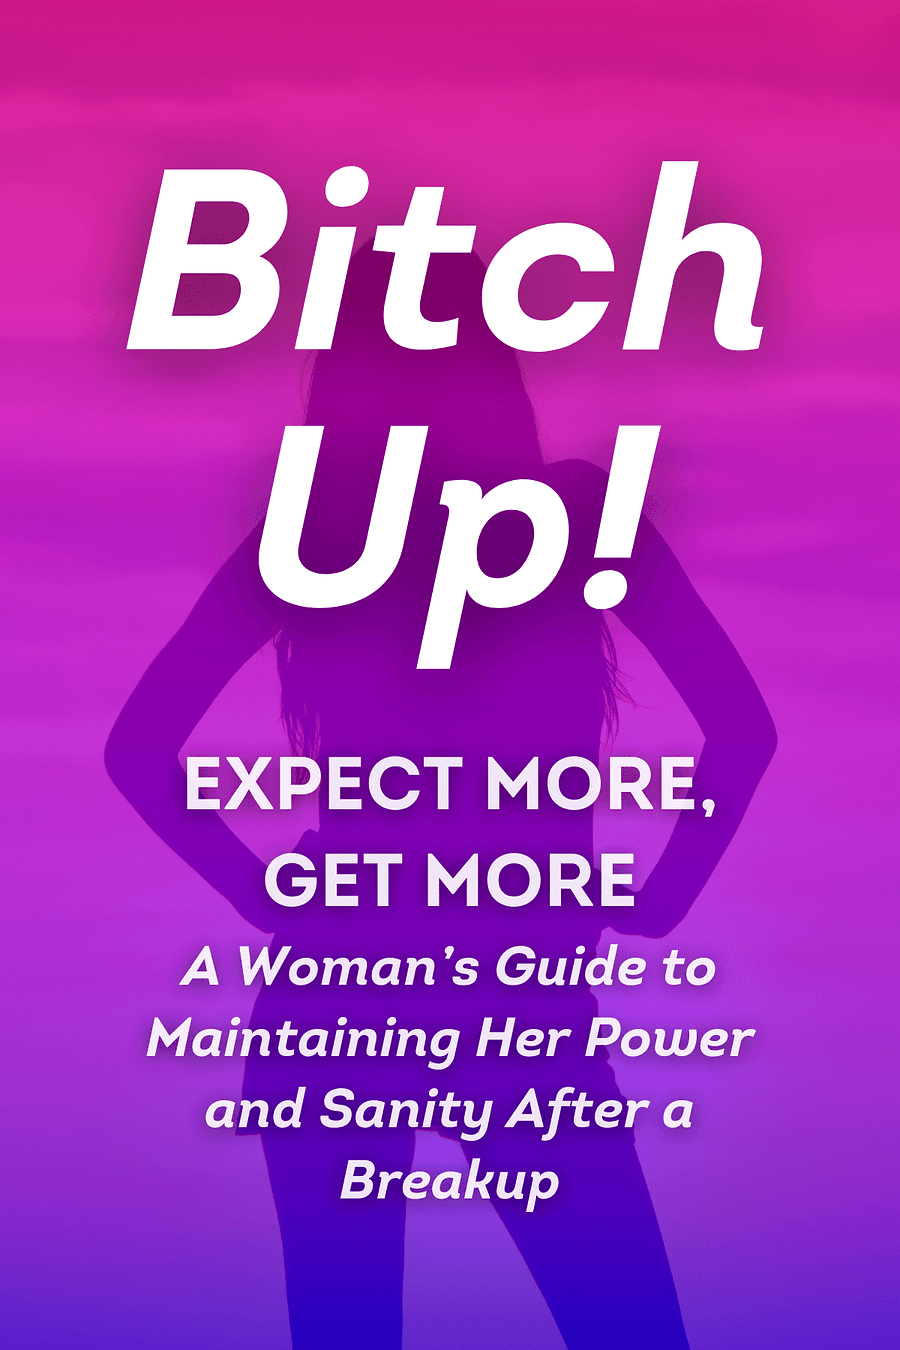 Bitch Up! Expect More, Get More by Leslie Braswell, Amanda Quick - Book Summary